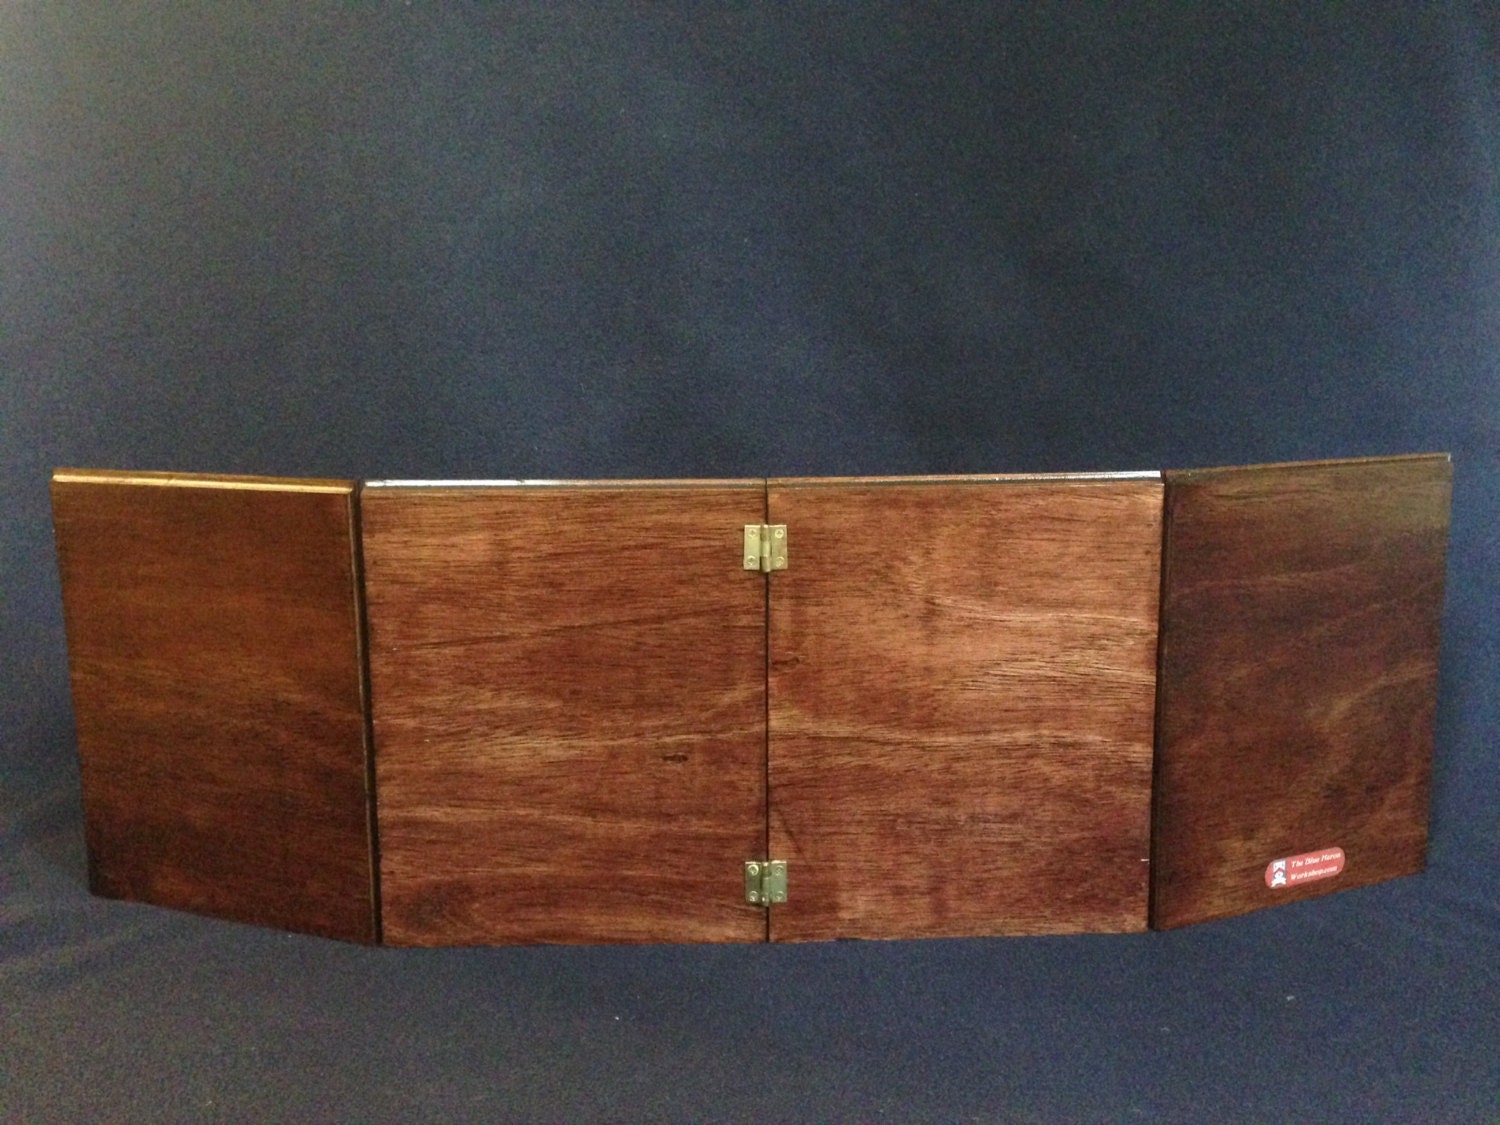 Polished Wood DM Screen Dungeon Master for Dungeon & Dragons